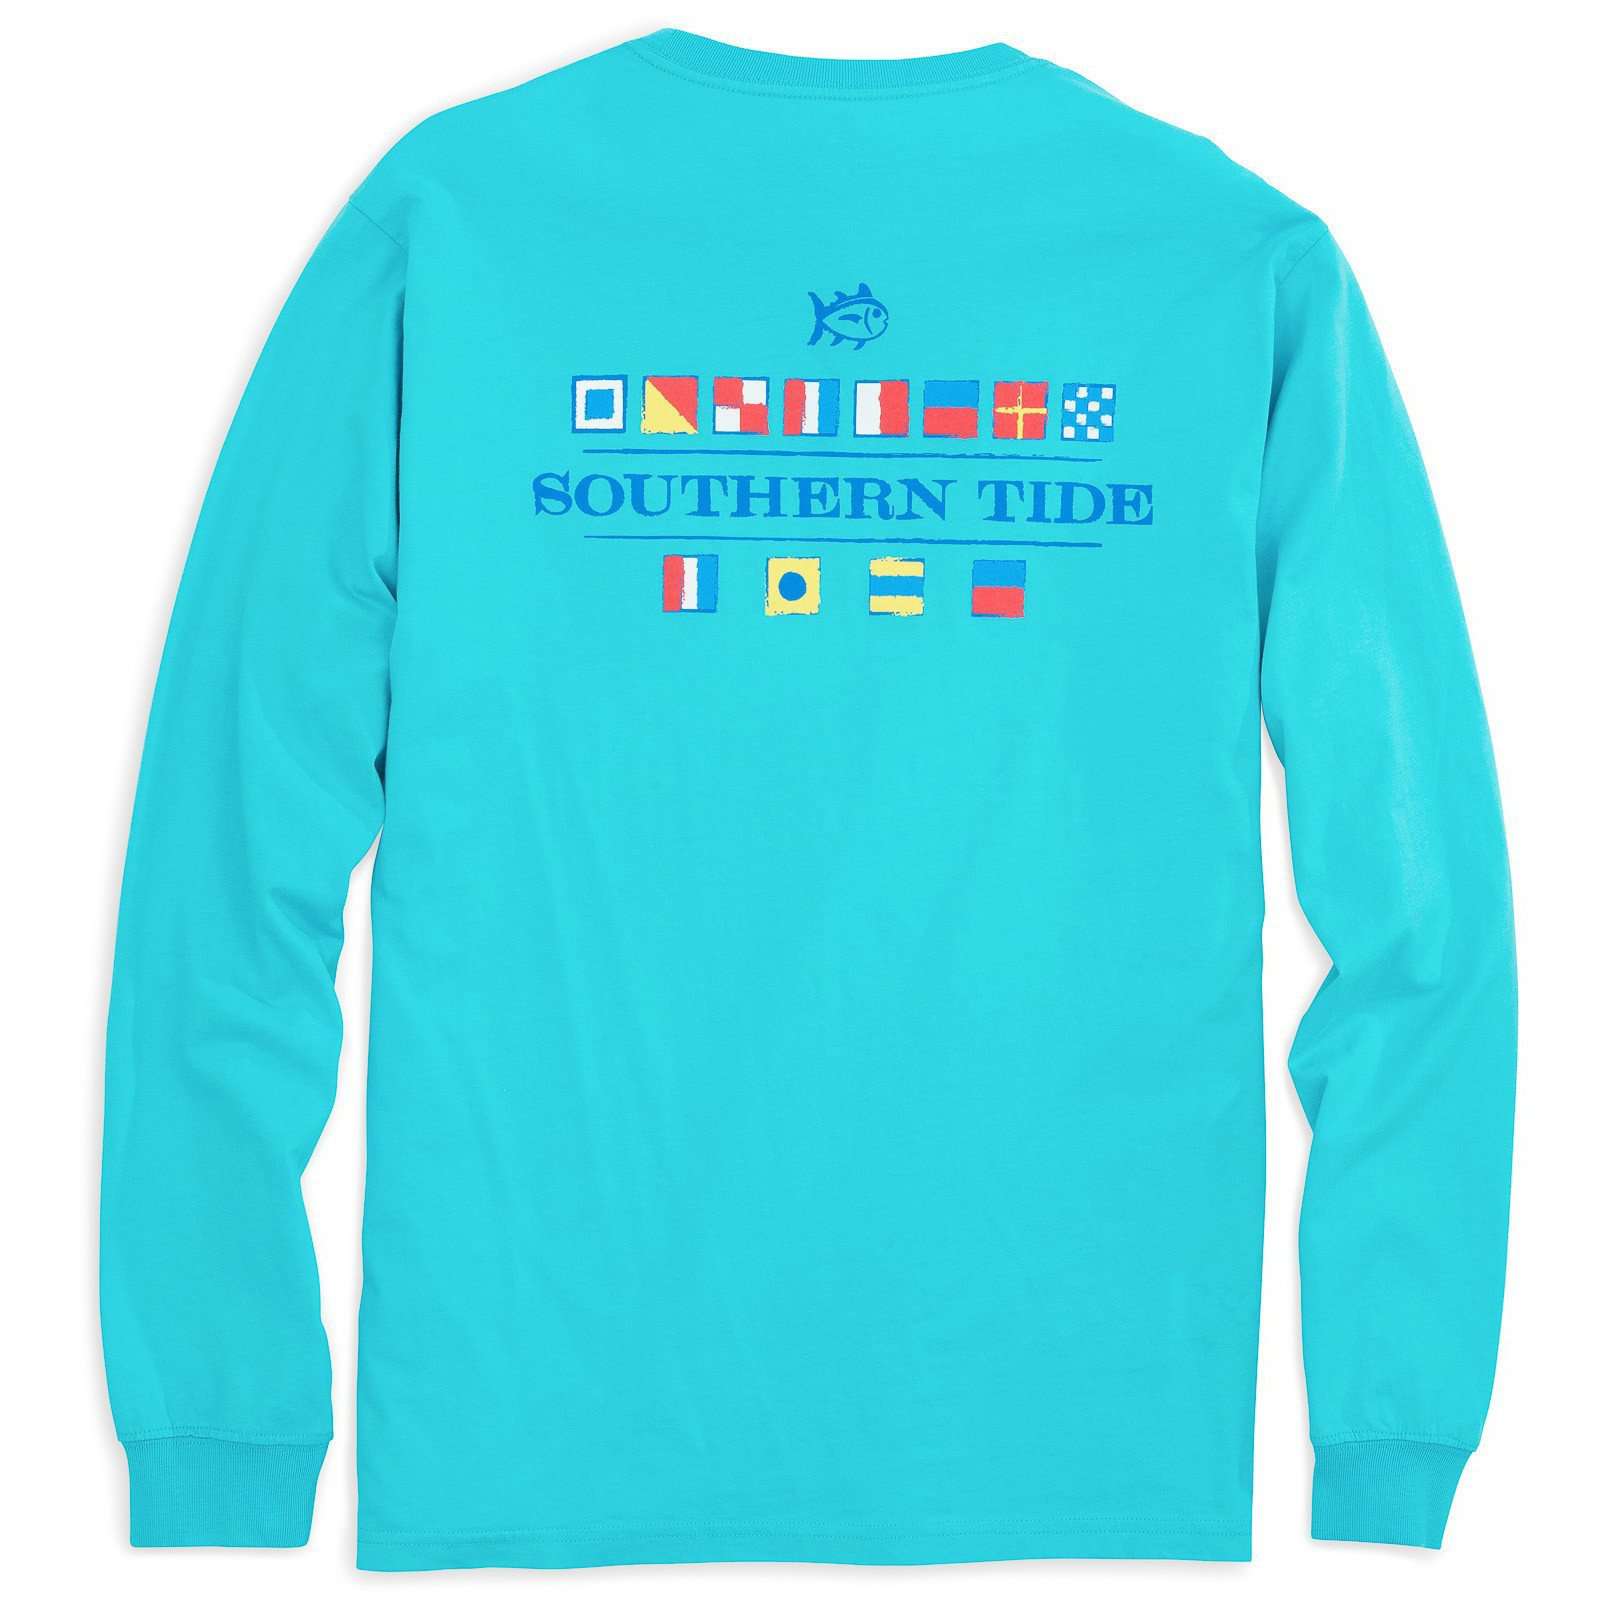 Long Sleeve Nautical Flags Tee Shirt in Scuba Blue by Southern Tide - Country Club Prep